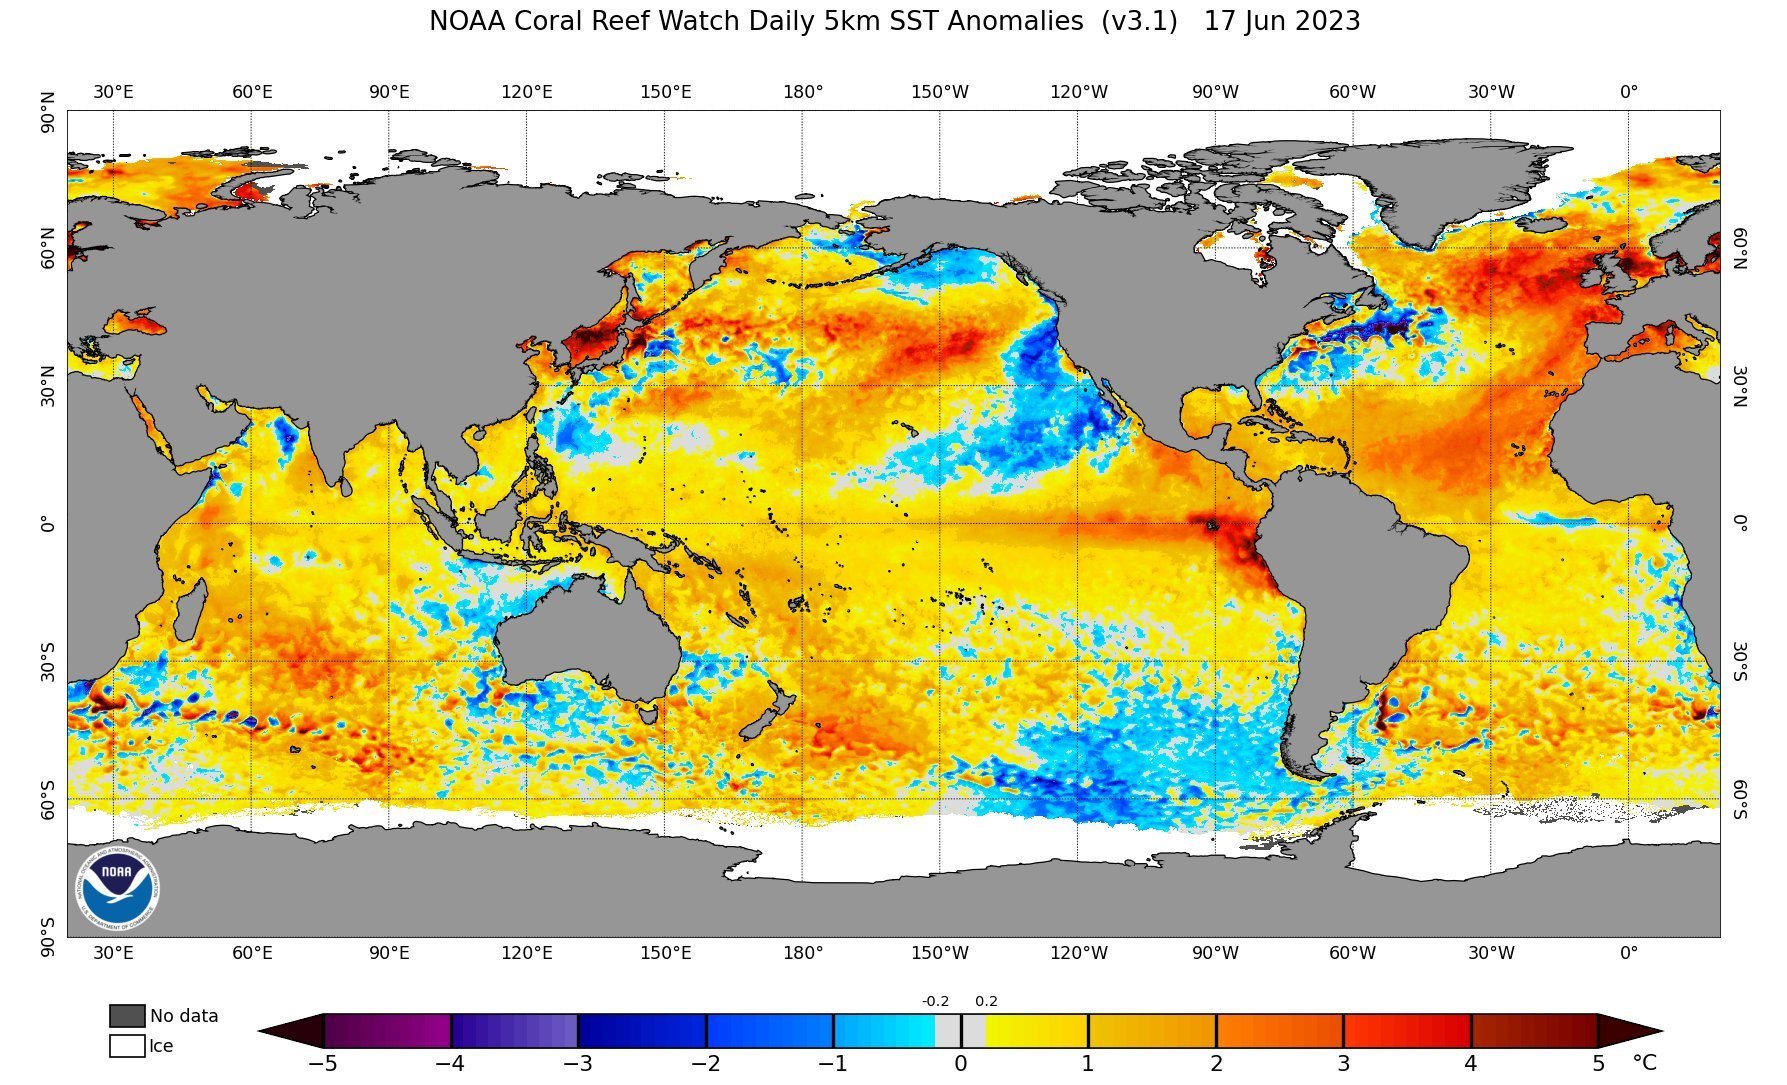 Ocean surface temperatures across the globe showing extreme heat levels in the North Sea.